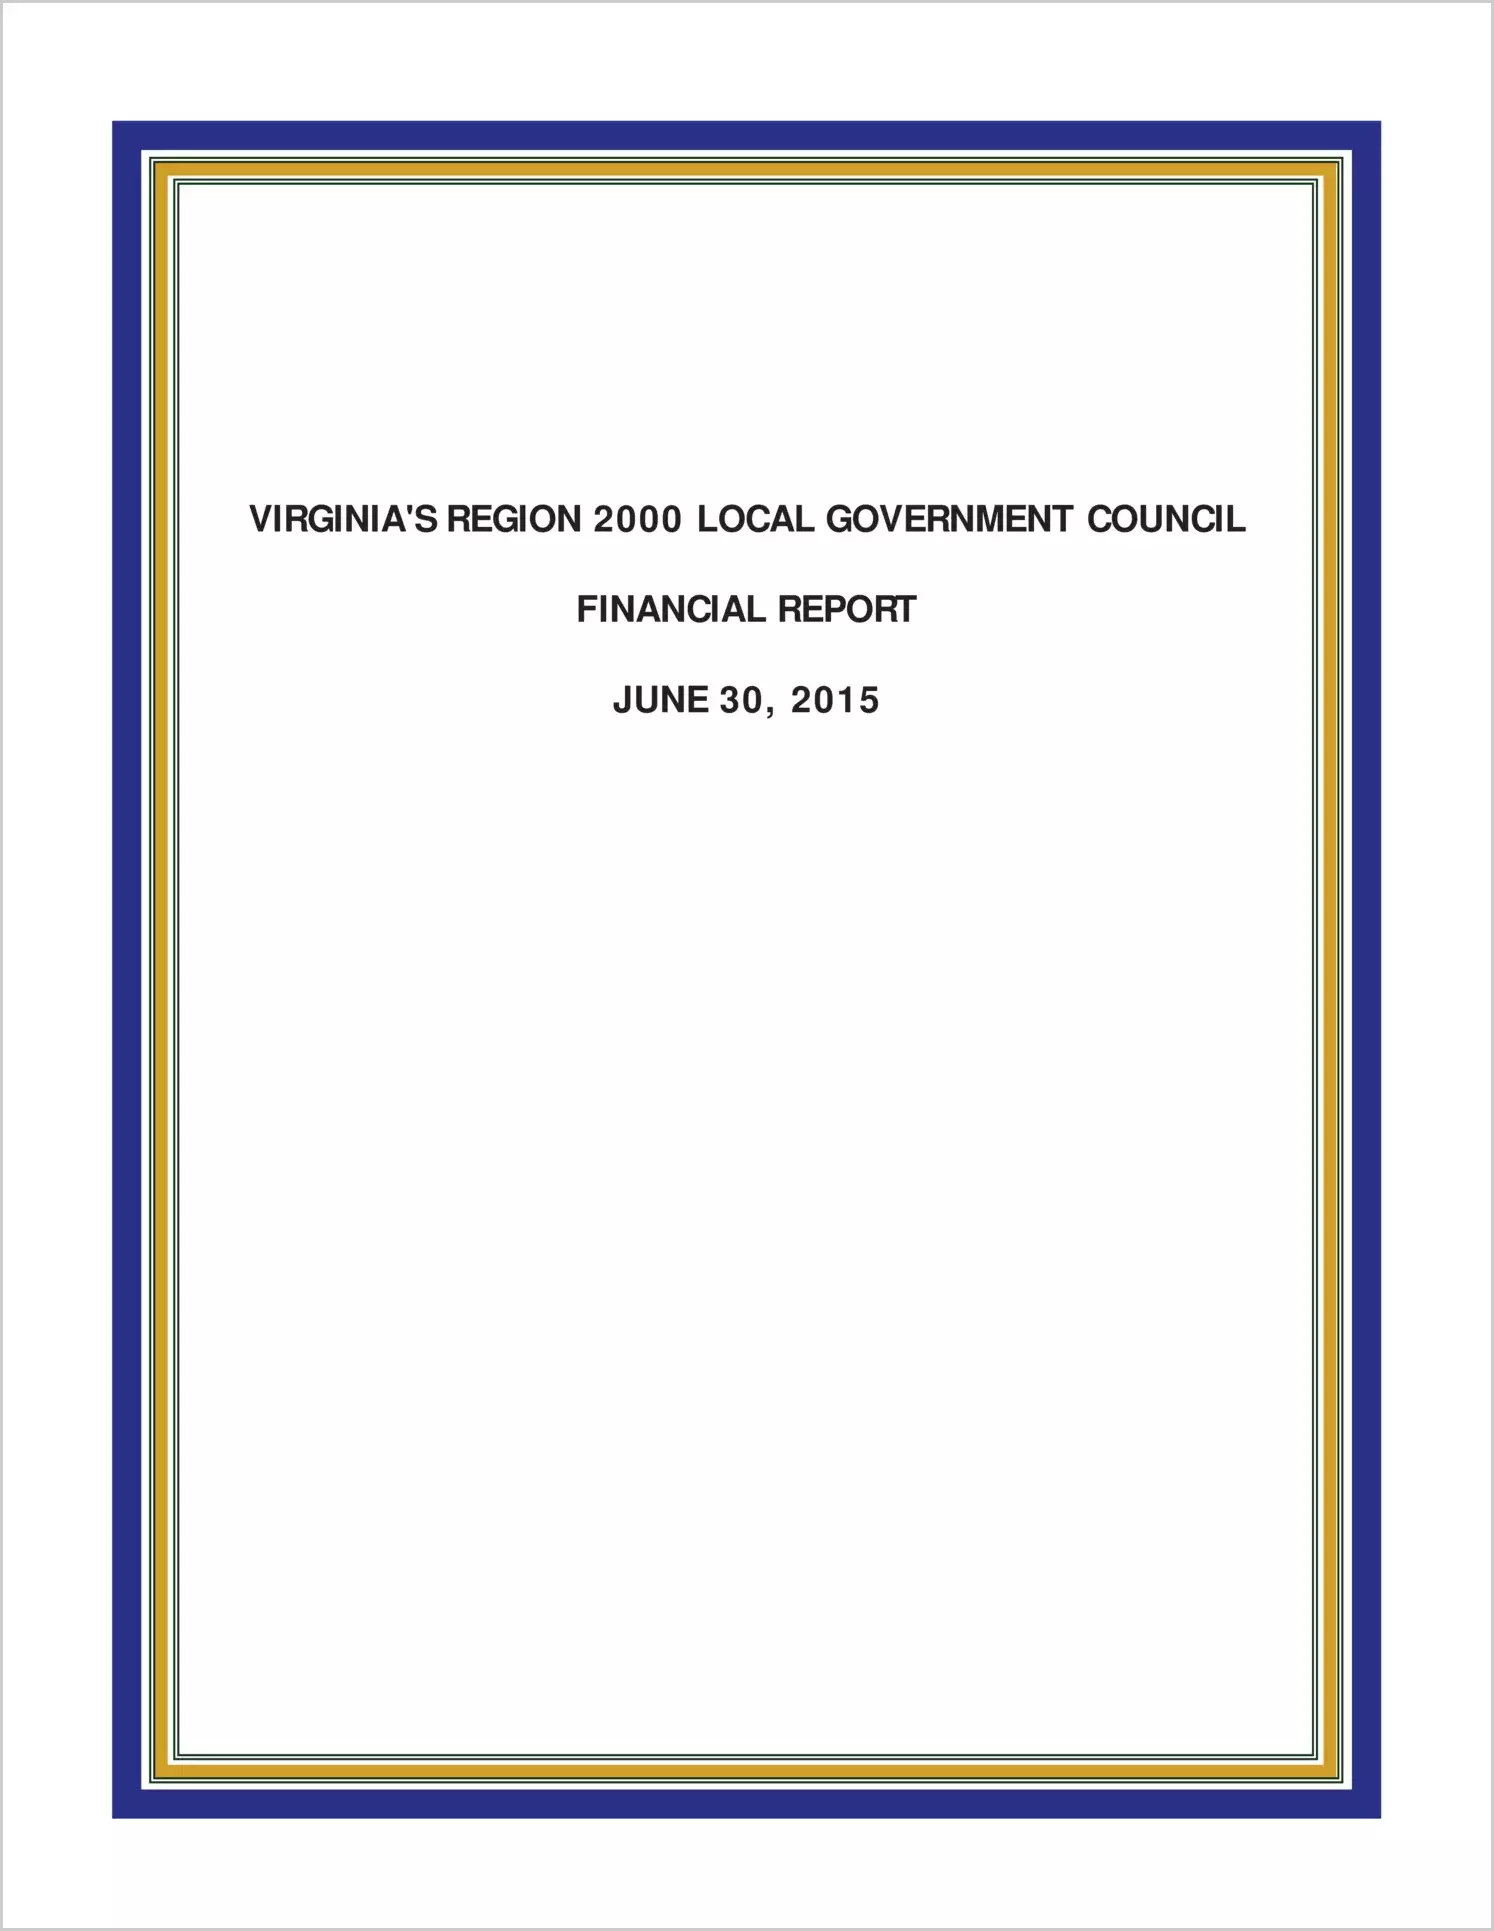 2015 ABC/Other Annual Financial Report  for Virginia's Region 2000 Local Government Council